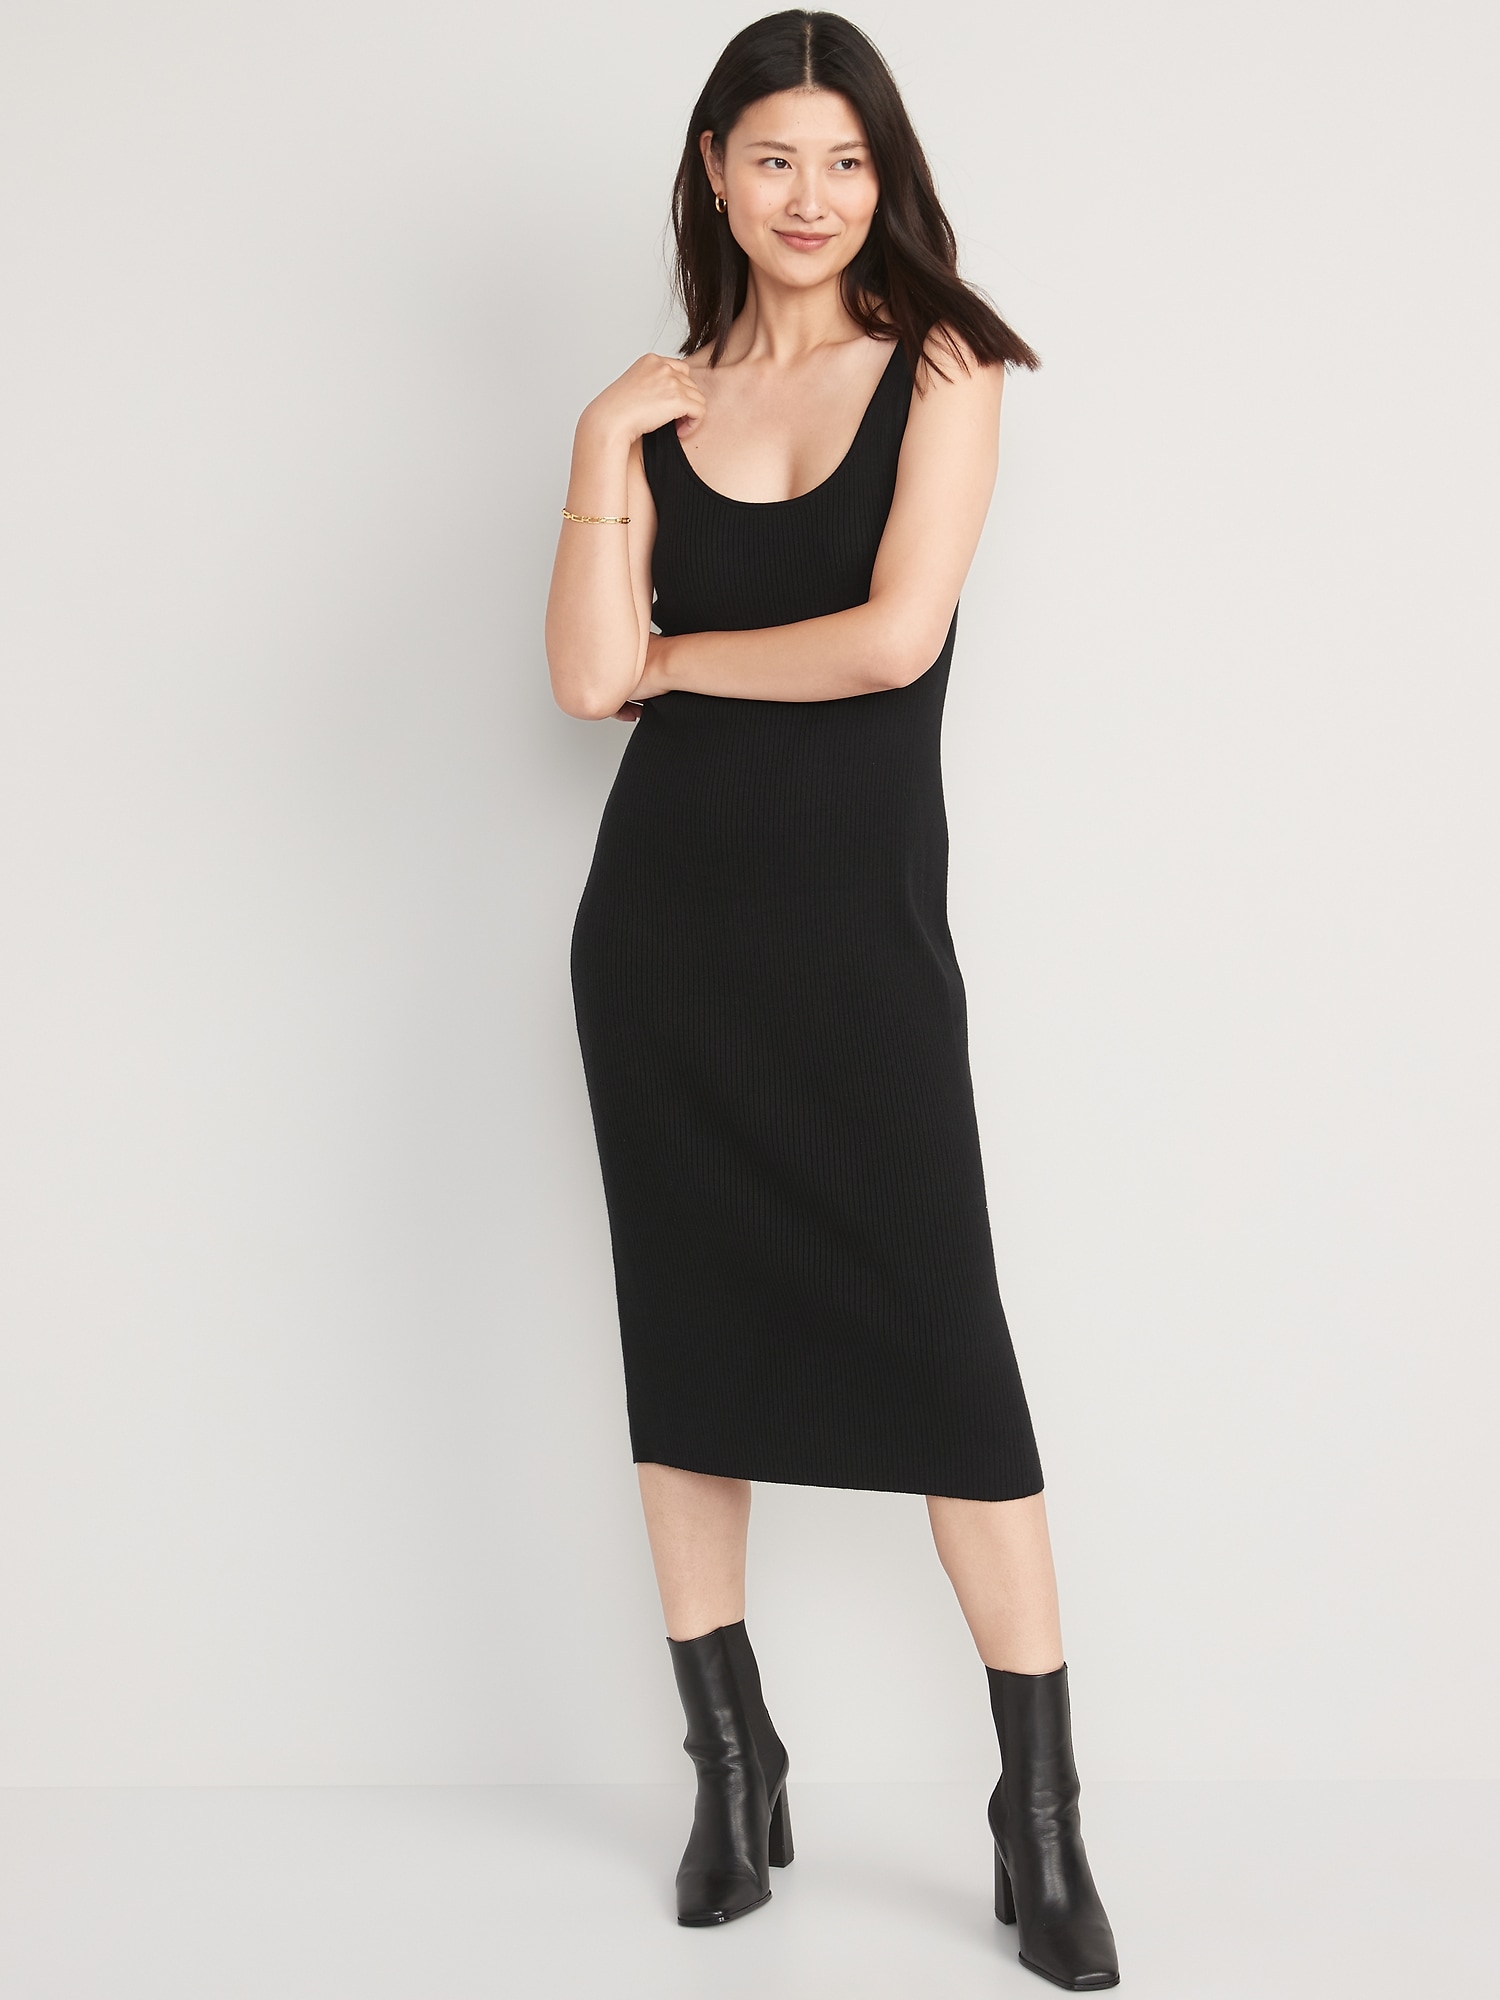 v28 Sweater Dress for Women Ribbed Knit Fitted midi Sexy Fall